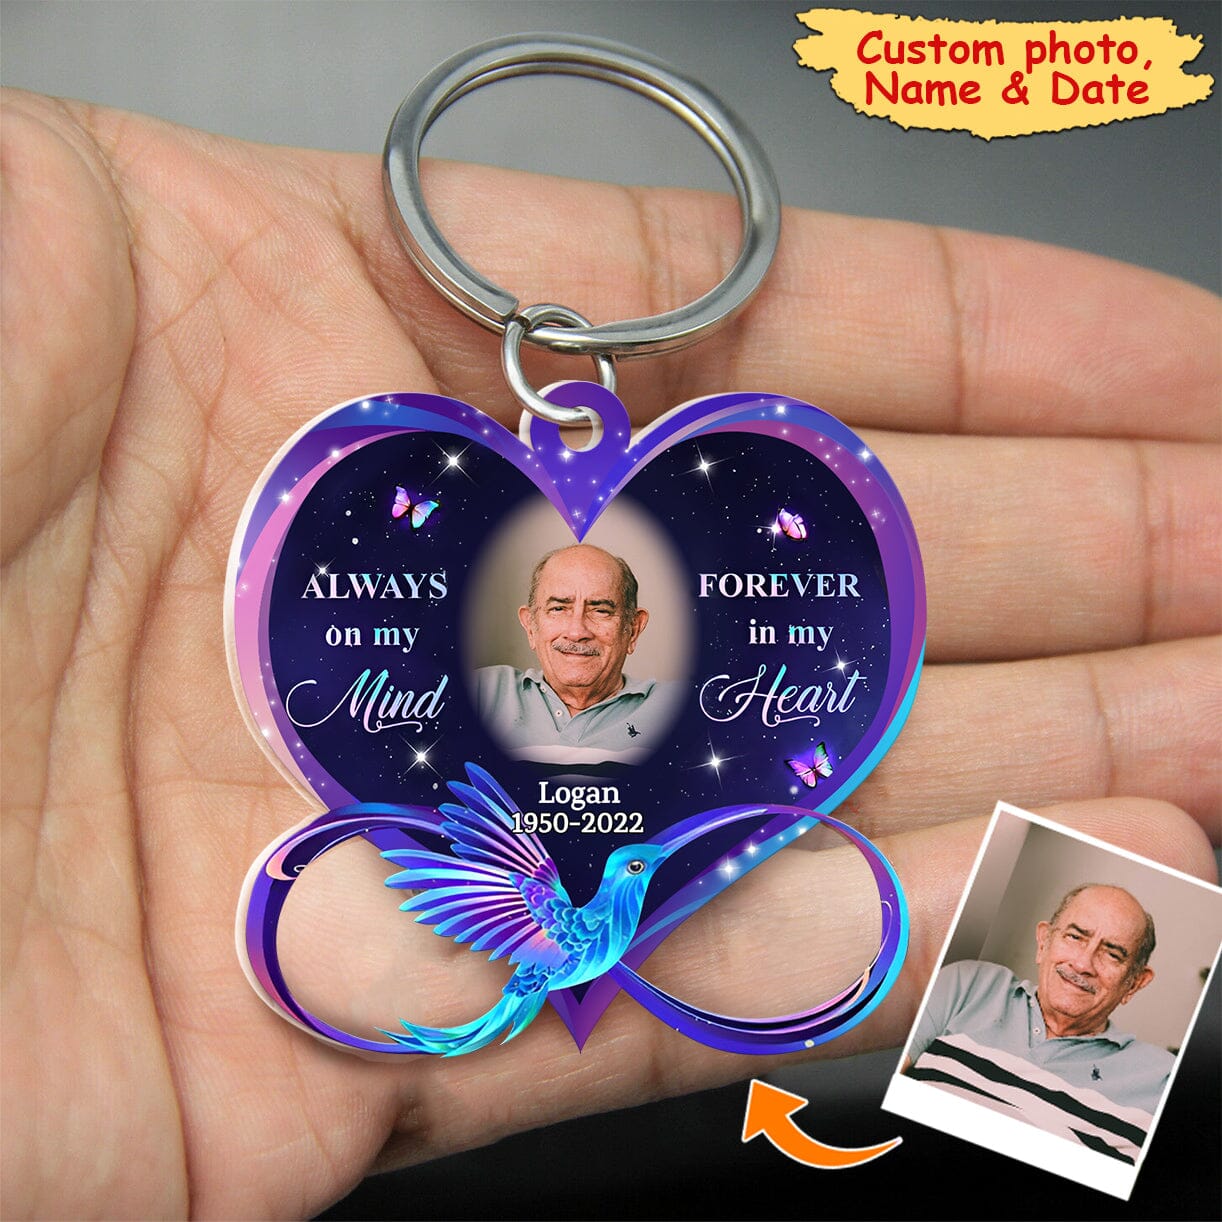 Always in my mind & Forever in my heart Memorial Personalized Keychain